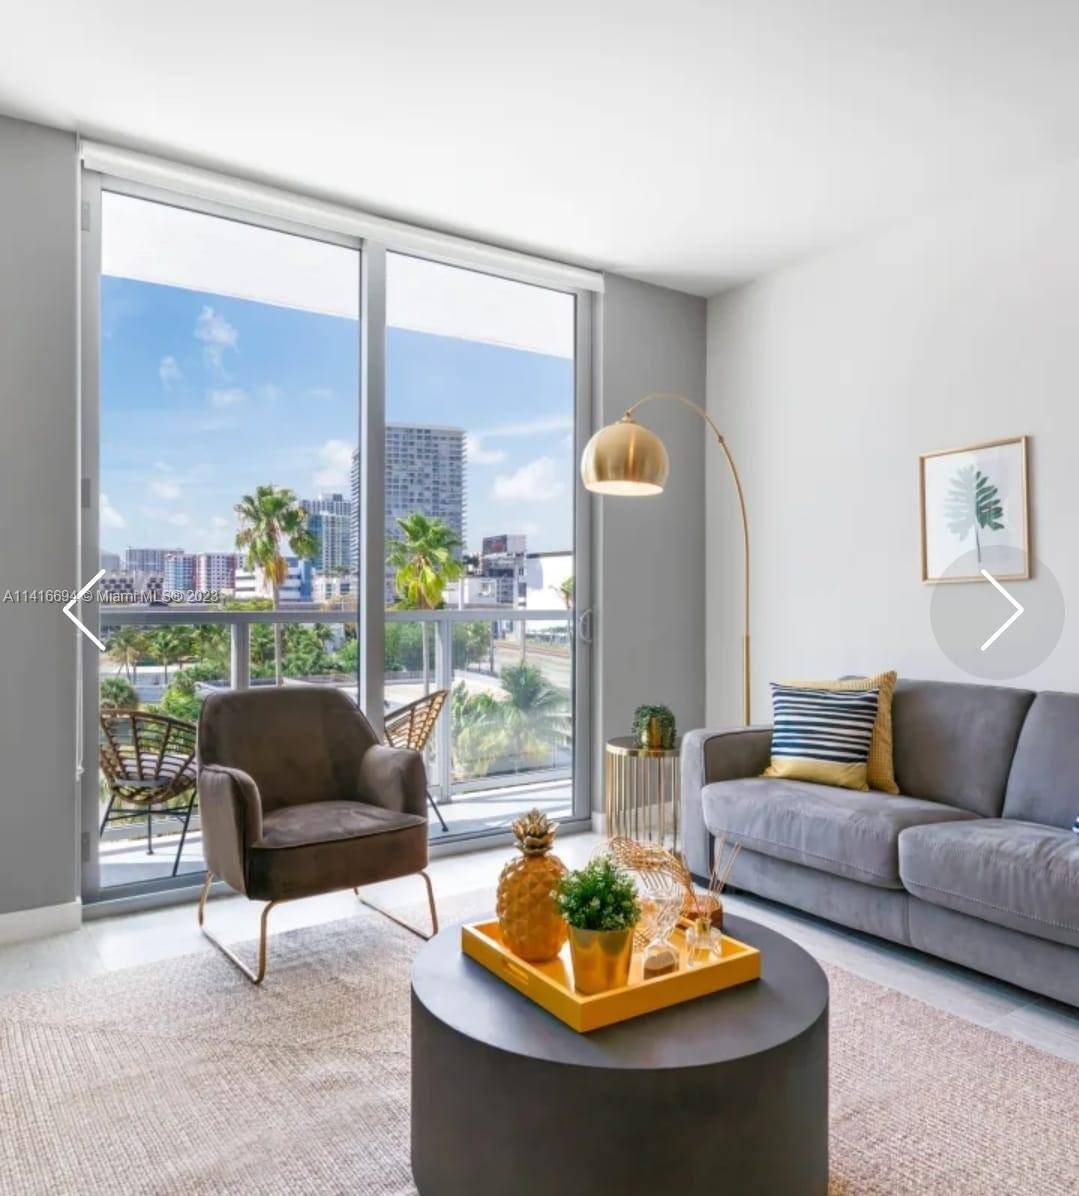 Exciting opportunity Stunning 1 bedroom condominium in a newly established building at the Miami Design District.